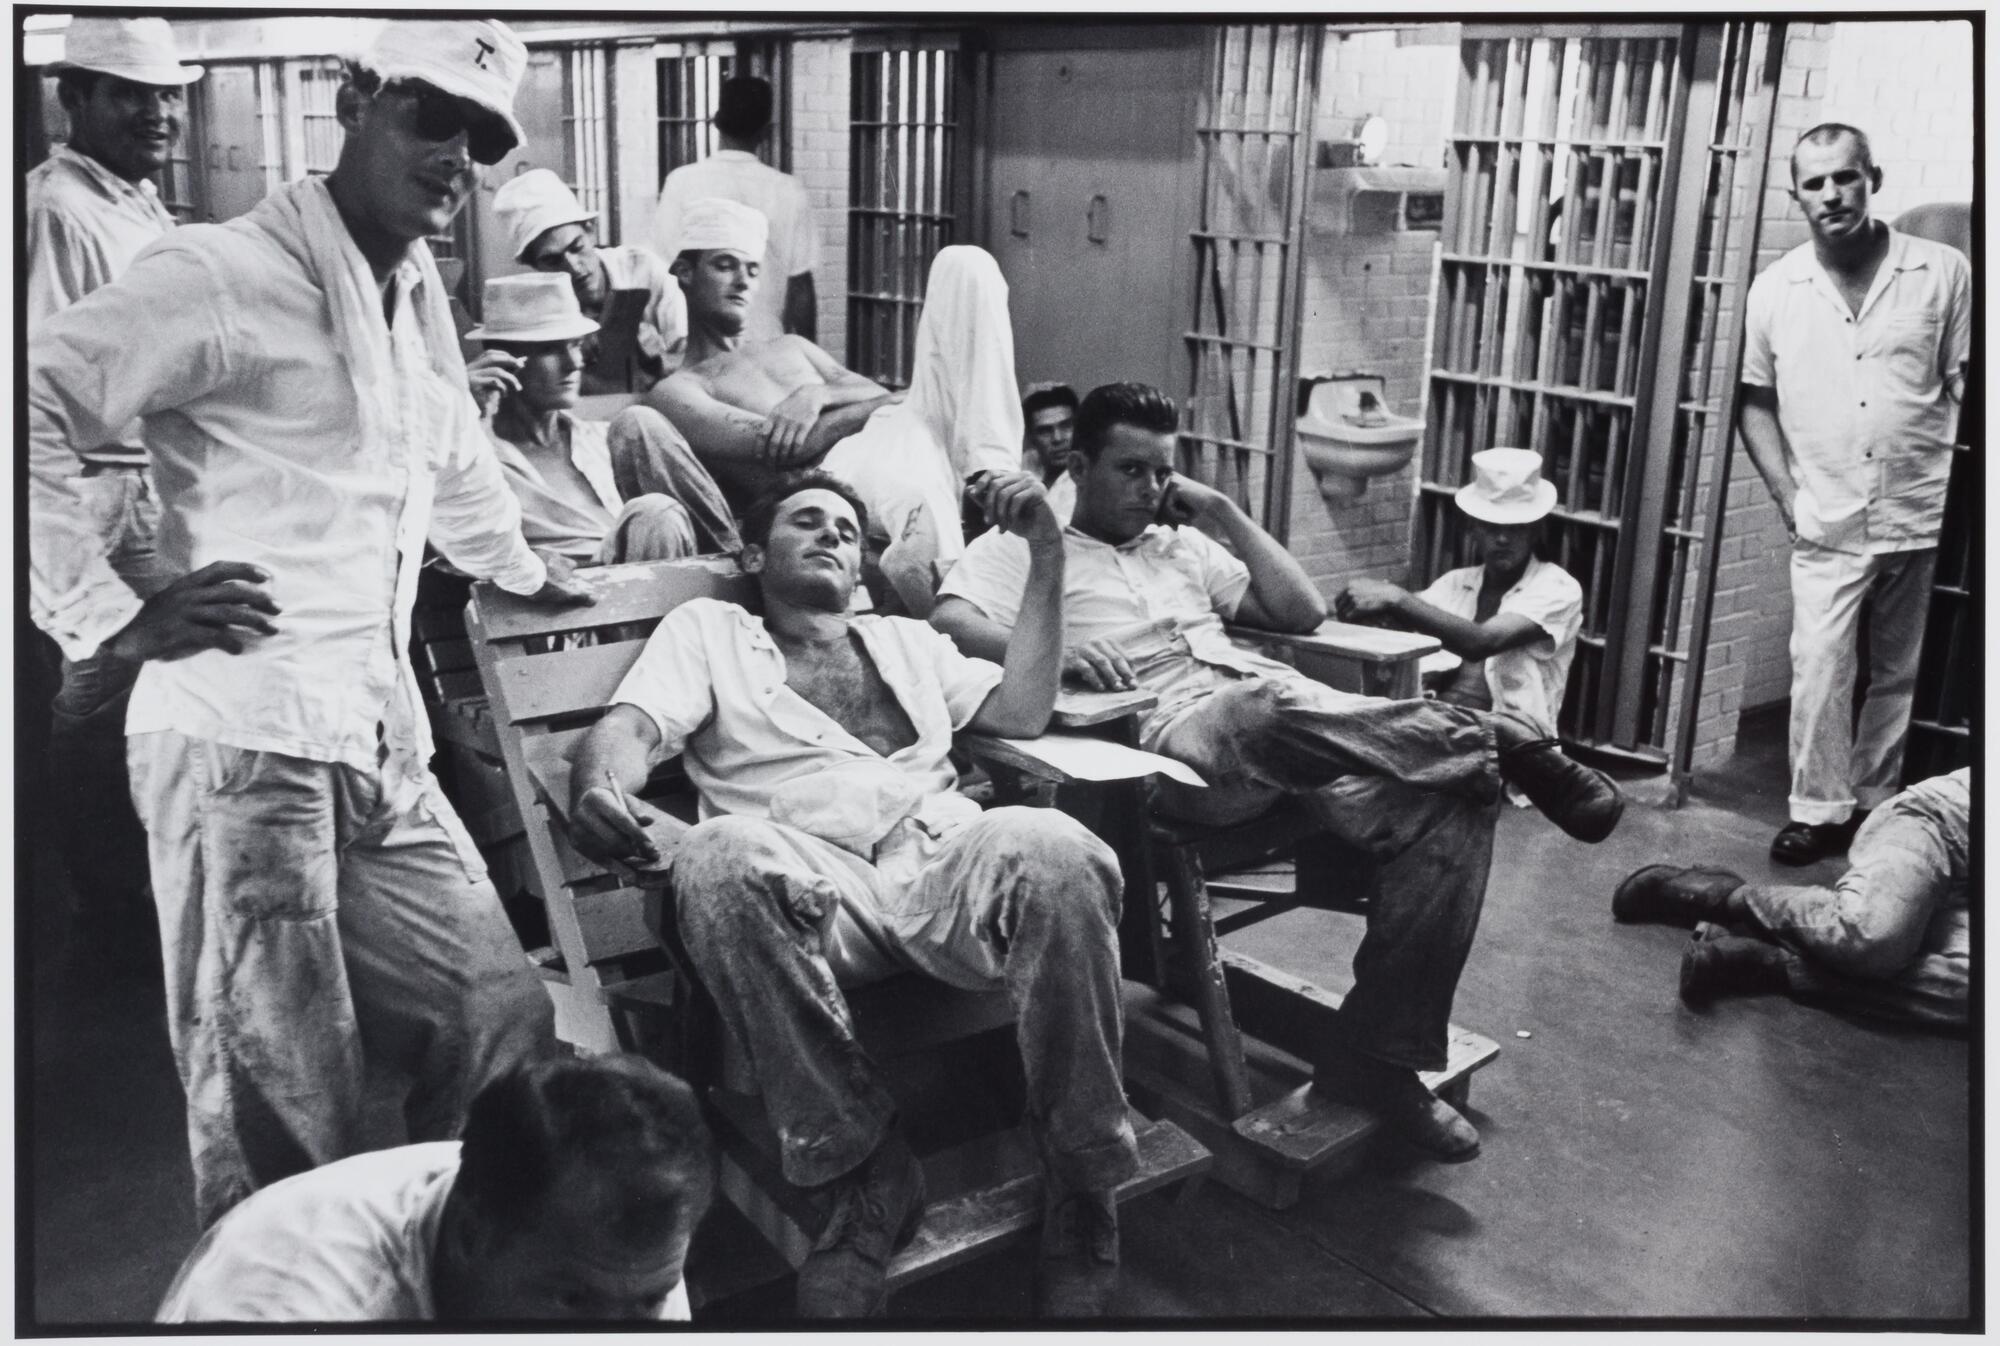 A group of prisoners in a relaxed area of a cell block. Most are seated and some are standing.